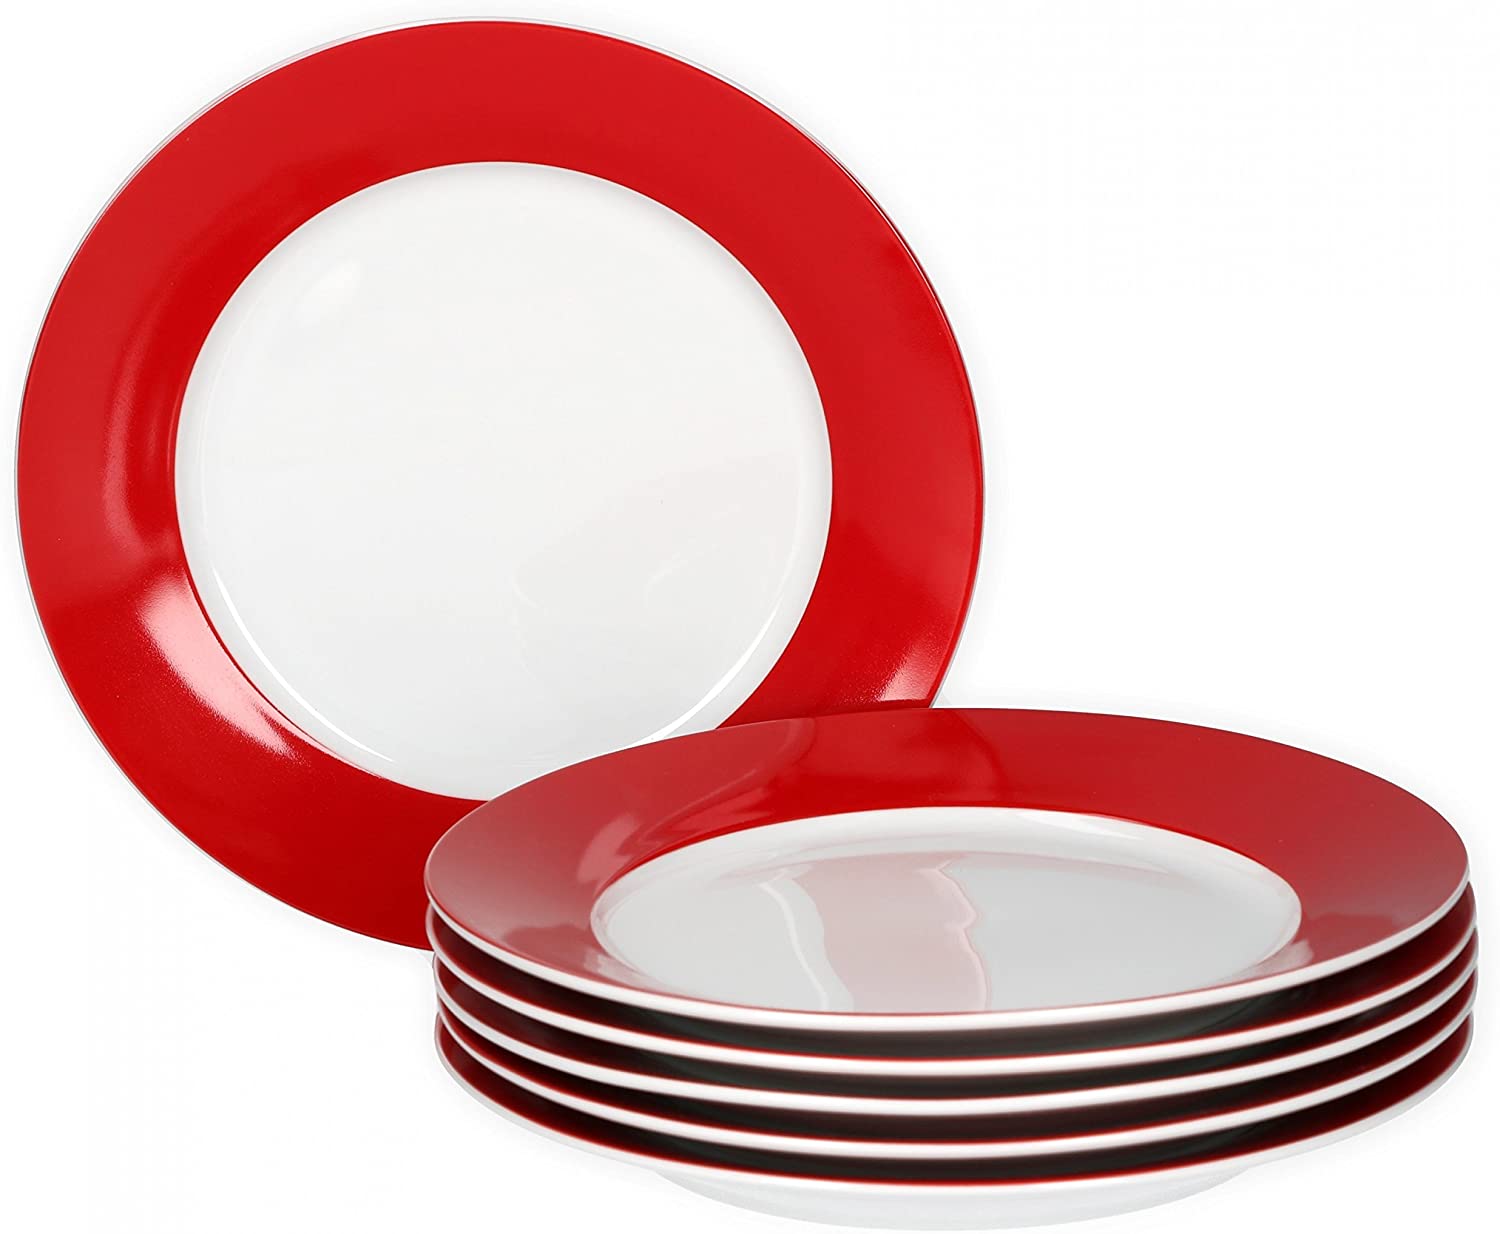 Van Well Vario Breakfast Plate Set 6 Pieces I Plate Service for 6 People I Cake Plate with Diameter 20 cm I Porcelain Set White with Red Edge I Dessert Plate Set Microwave Safe